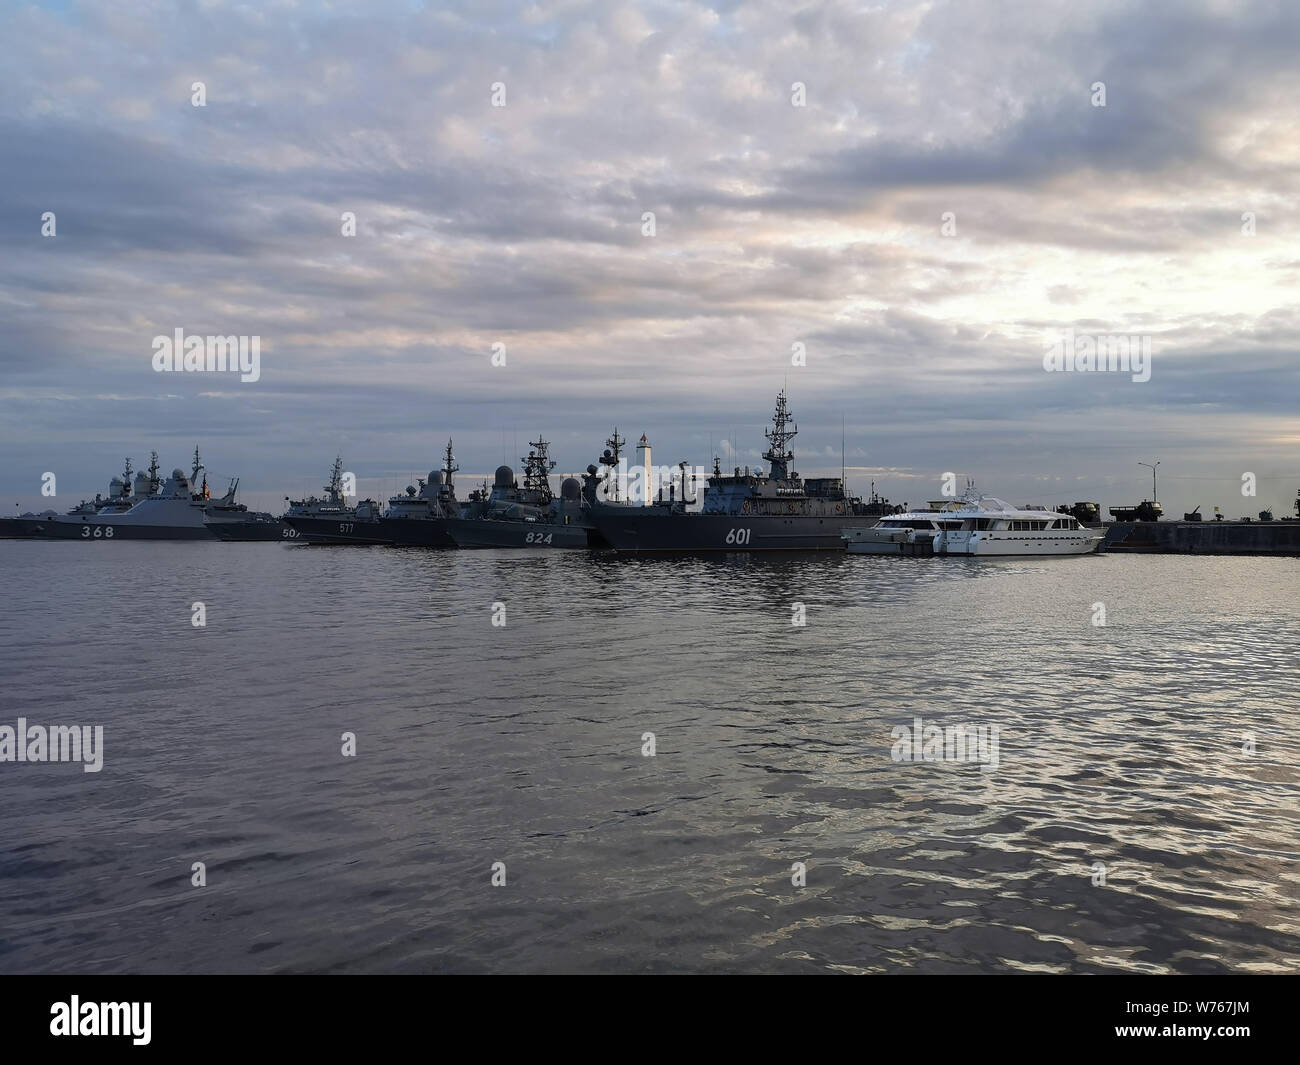 Kronstadt, Russian - July 23, 2019: view of the warships of the navy of Russia in the bay of Kronstadt Stock Photo